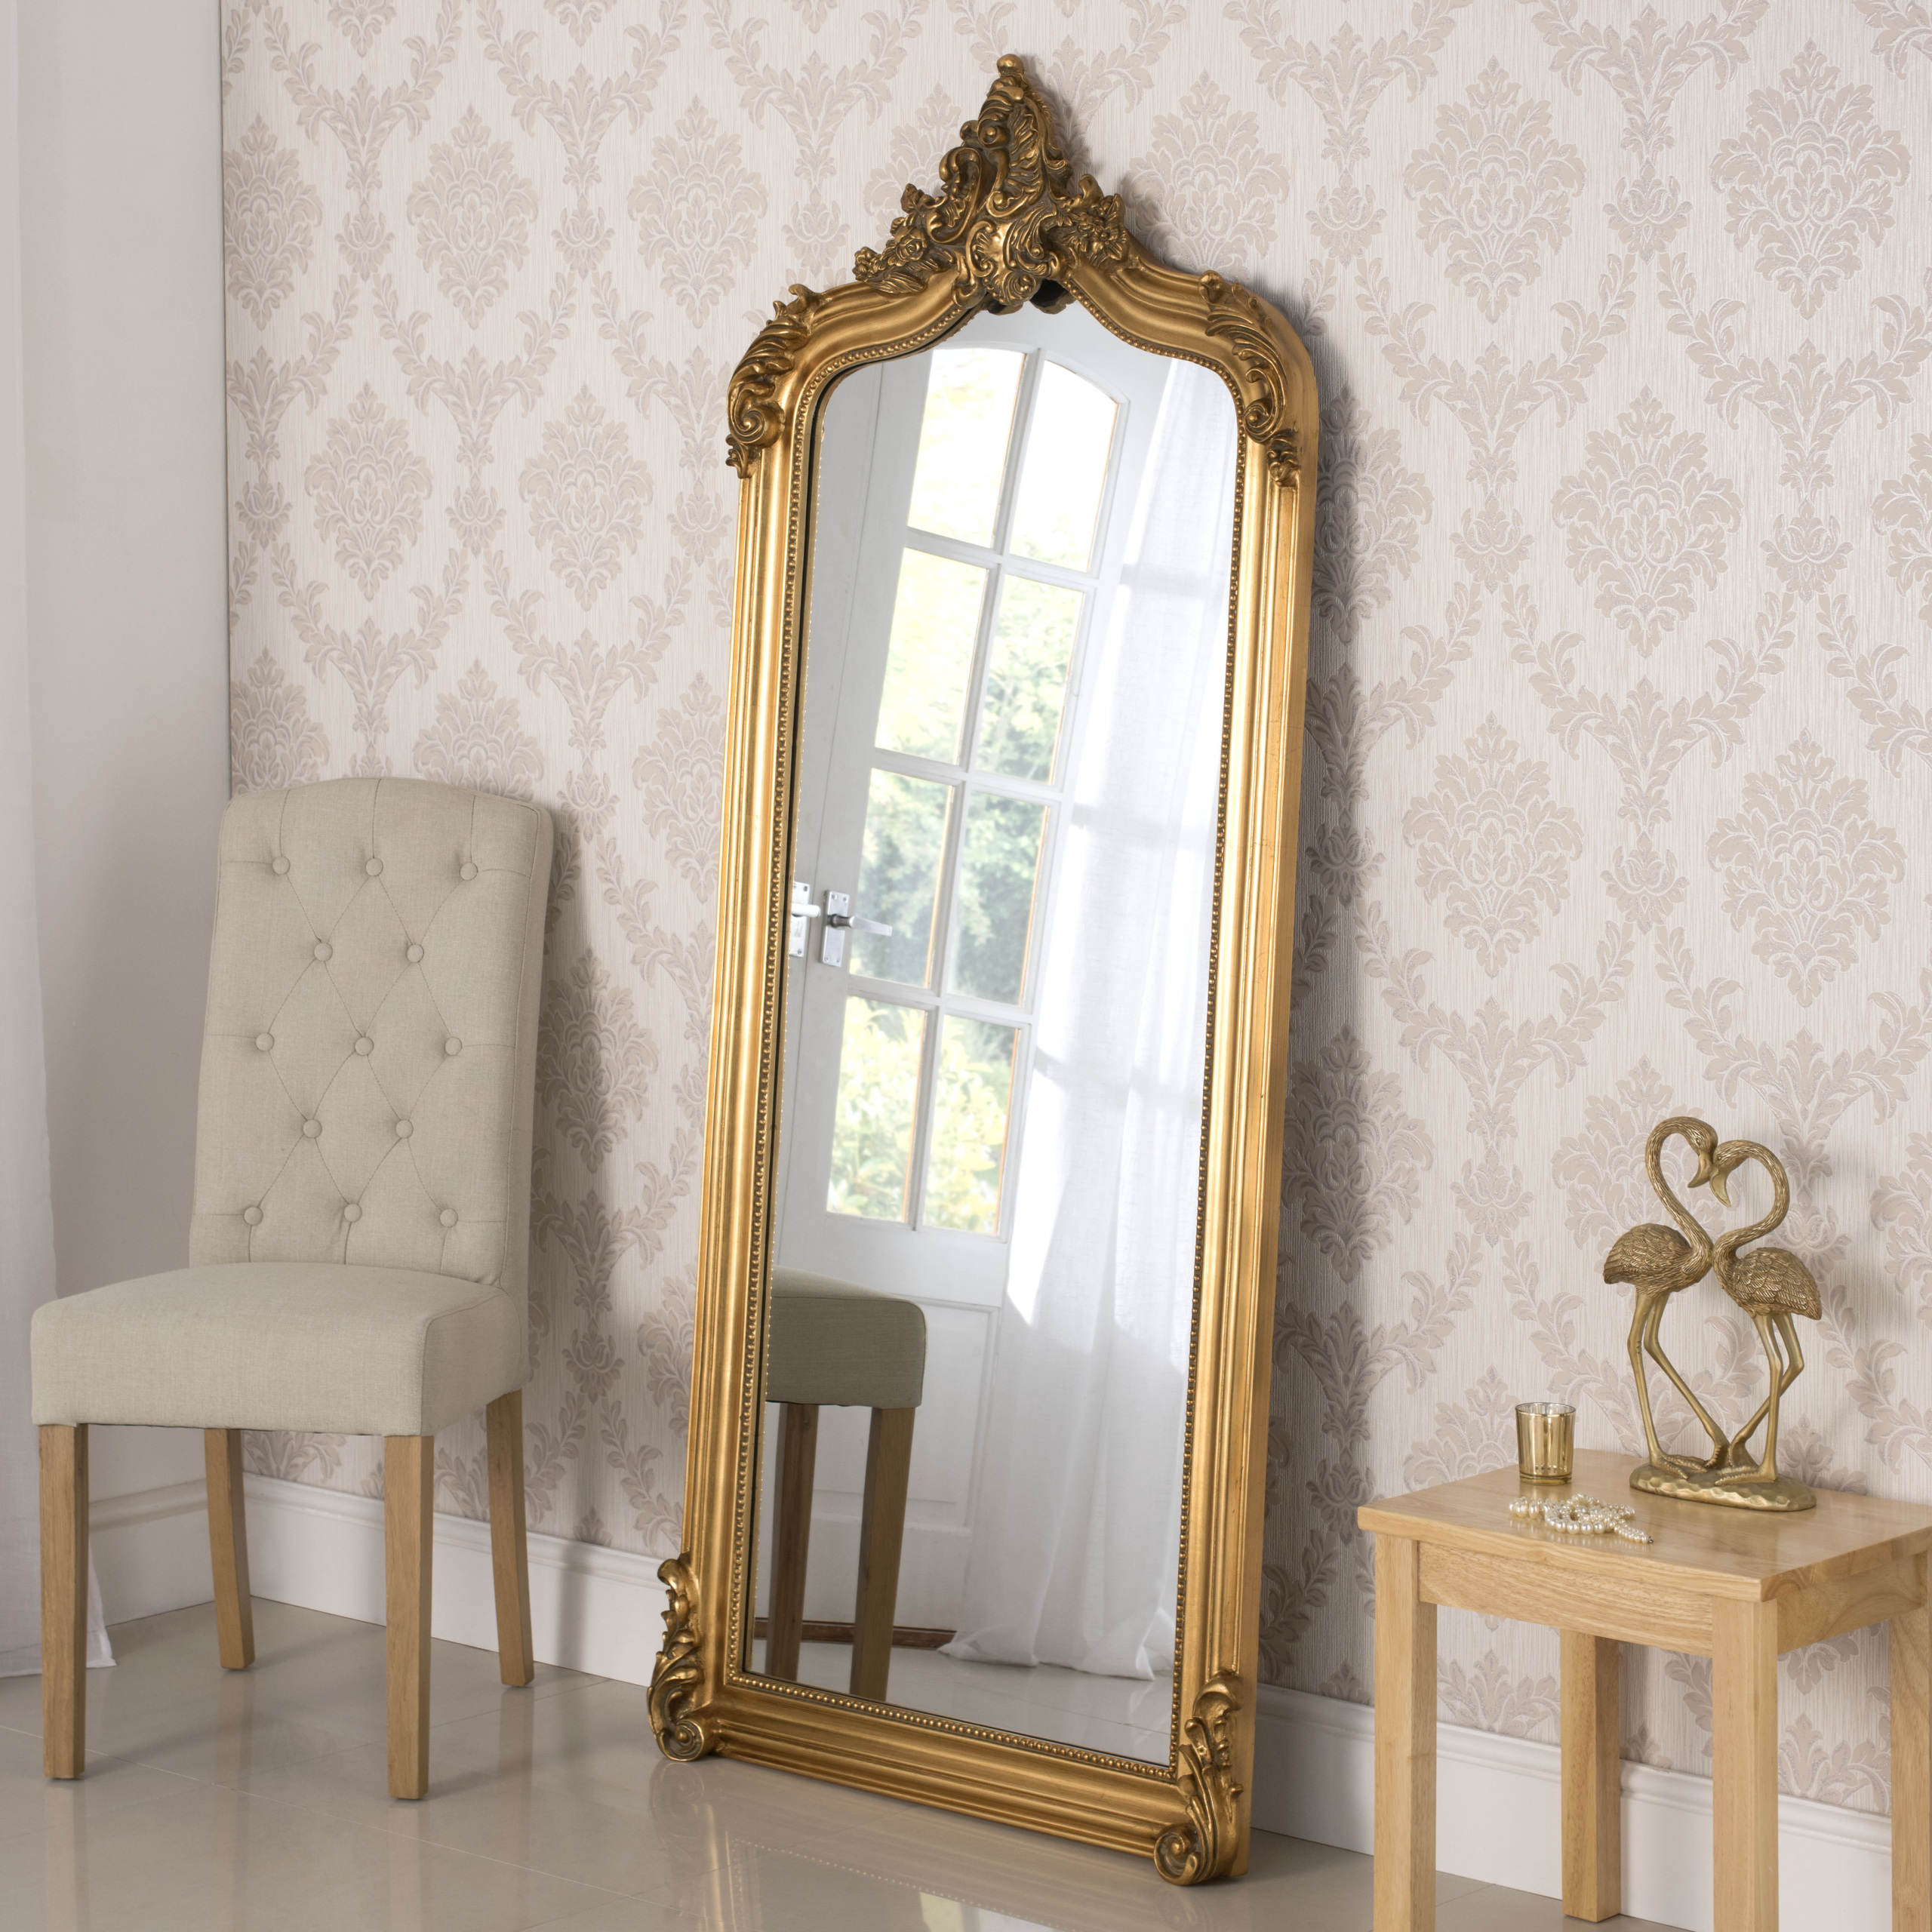 Full Length Mirror Ireland : New And Used Full Length Mirrors For Sale